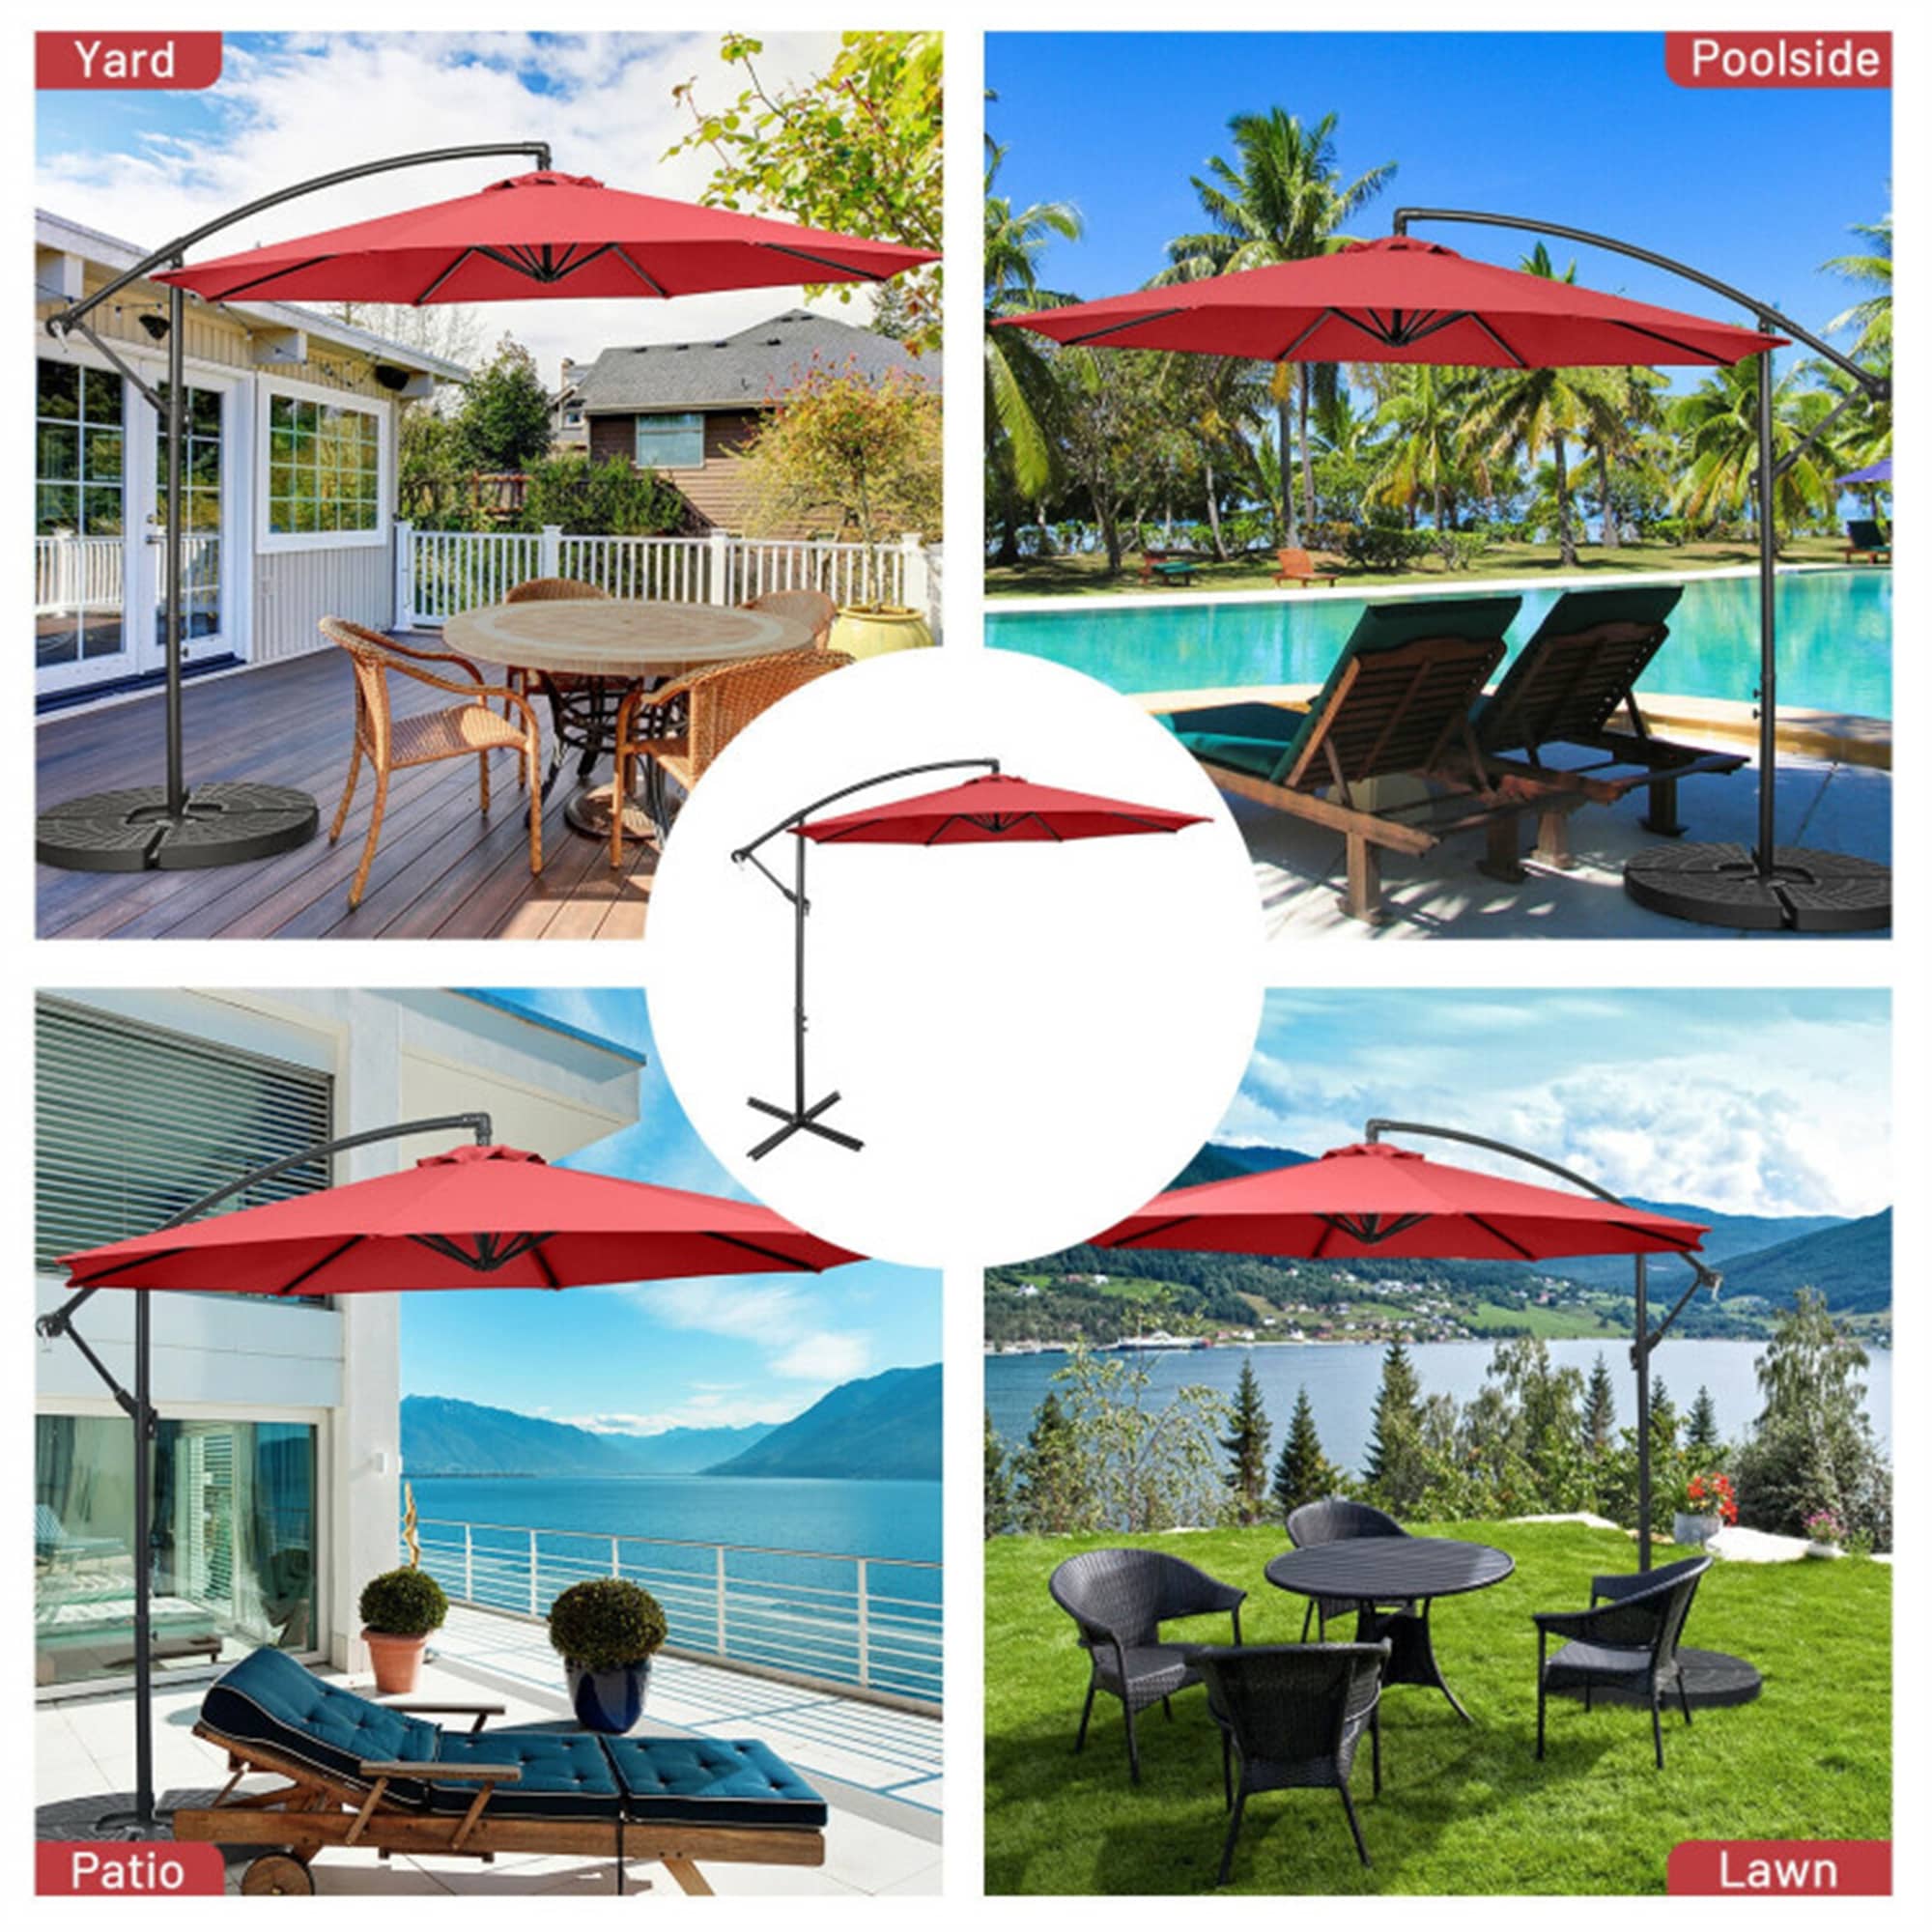 10 ft. Offset Patio Umbrella for Yard, Poolside, Patio and Lawn